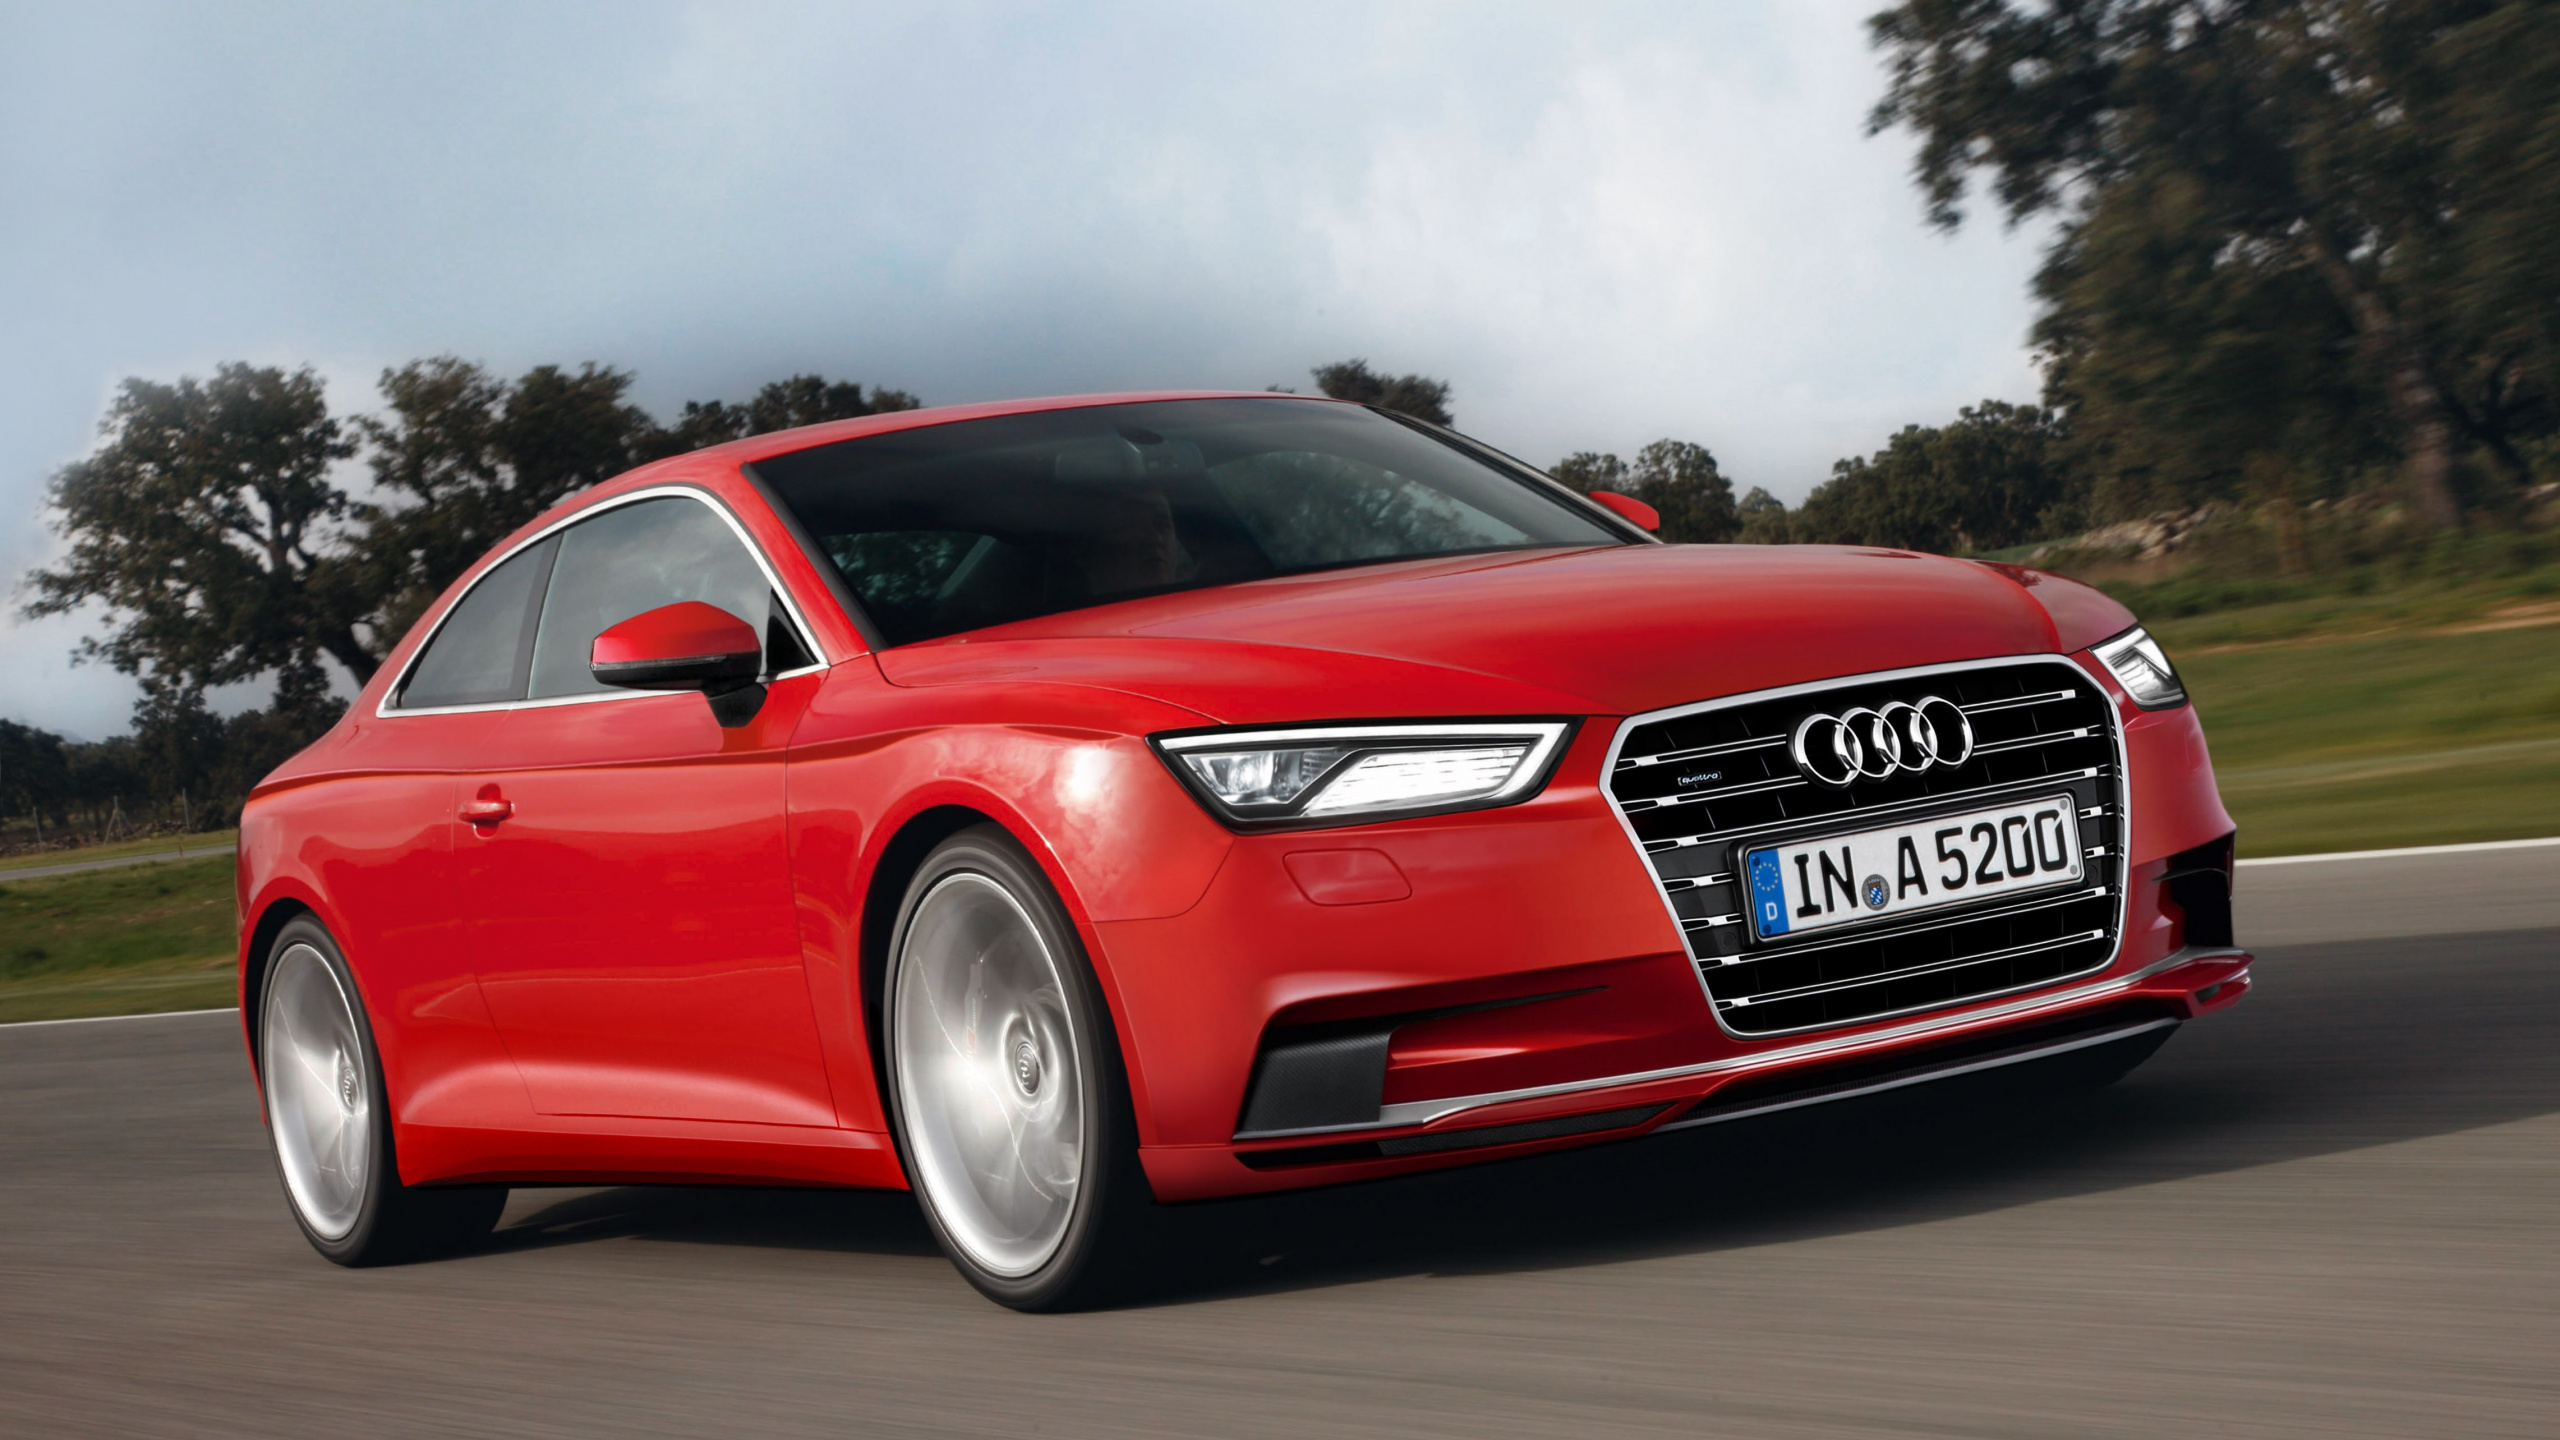 Red Audi Coupe on Road. Wallpaper in 2560x1440 Resolution